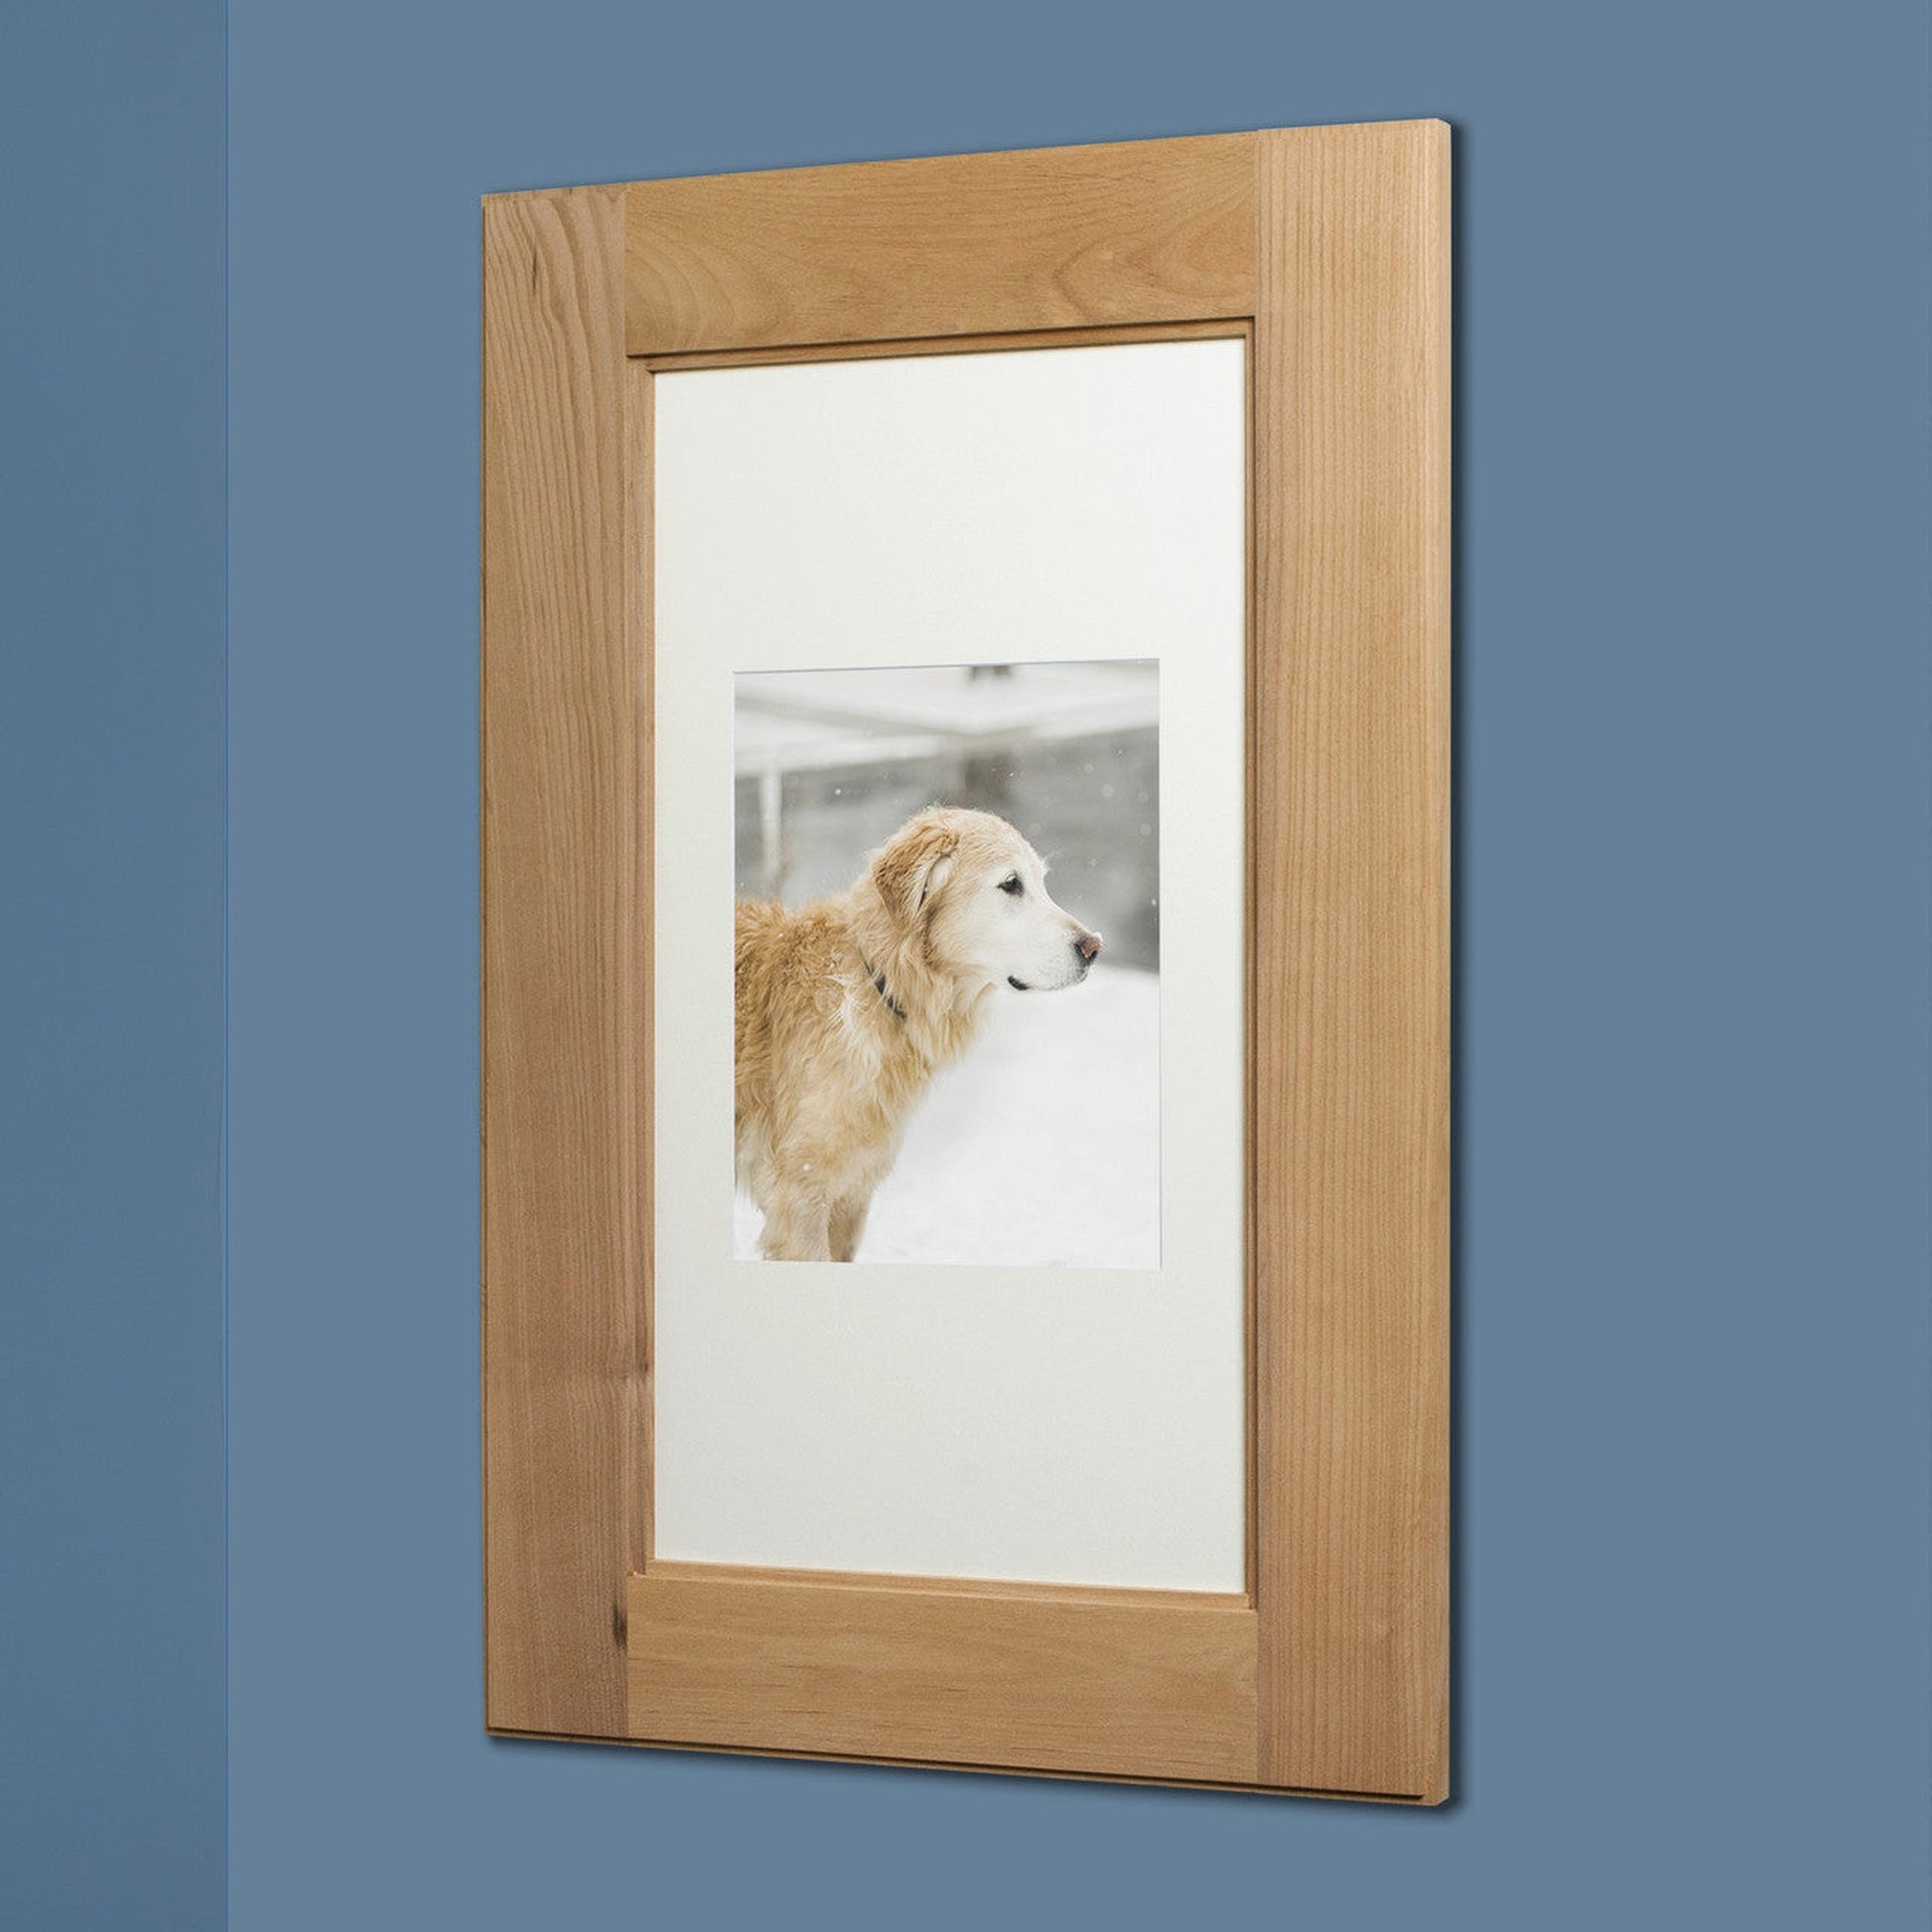 Fox Hollow Furnishings 14" x 24" Extra Large Unfinished Standard 4" Depth Natural Interior Recessed Picture Frame Medicine Cabinet